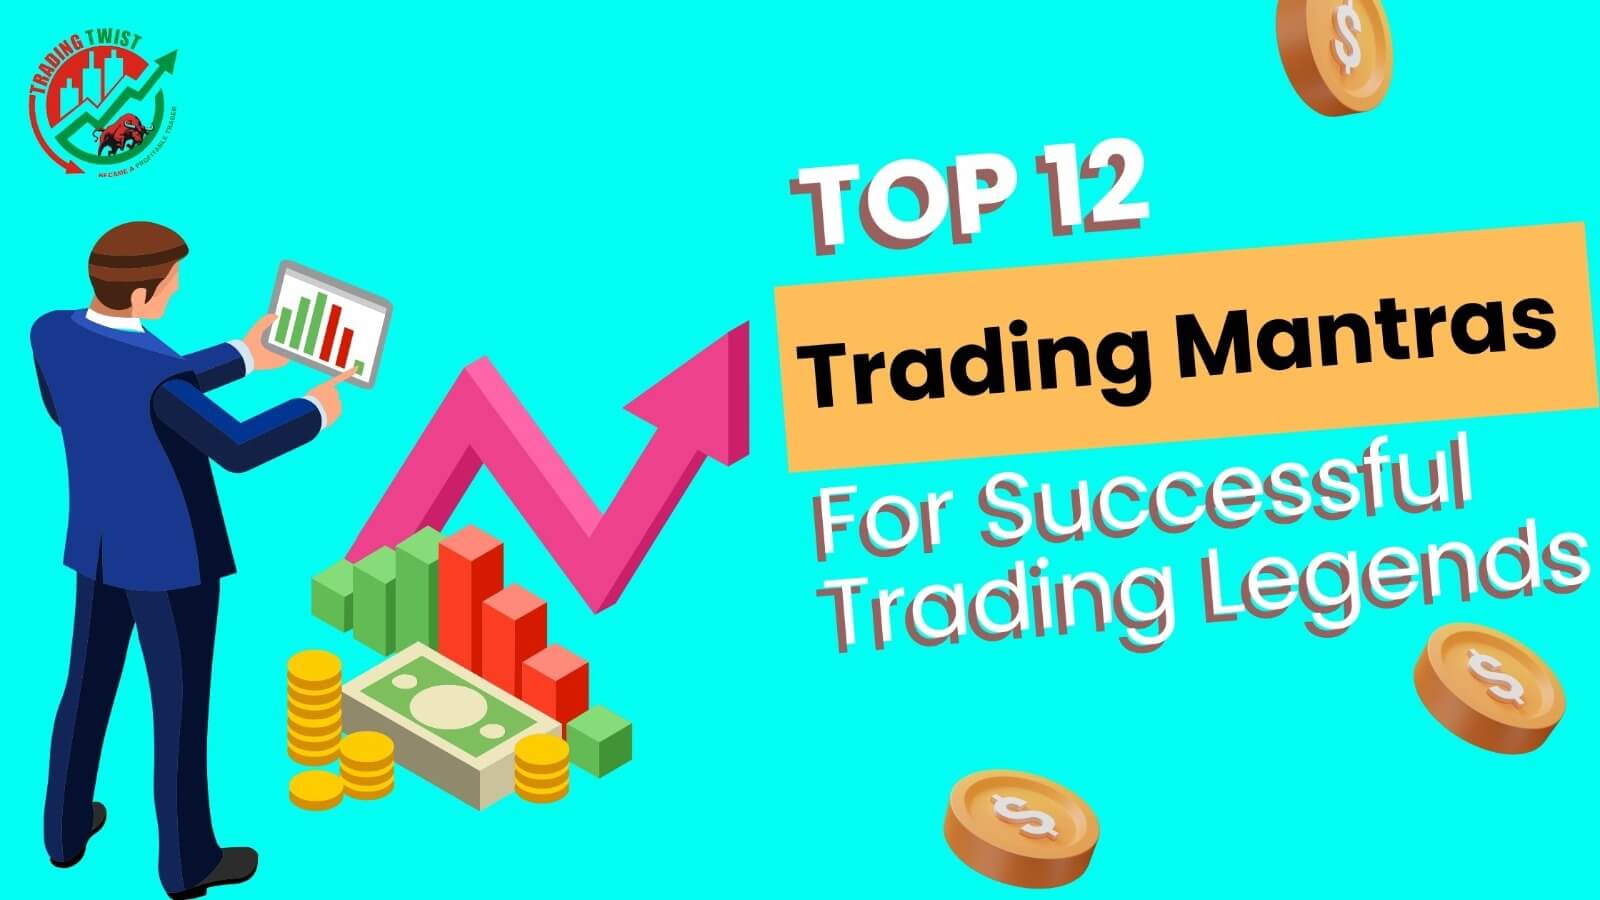 Top 12 Trading Mantras from Successful Trading Legends